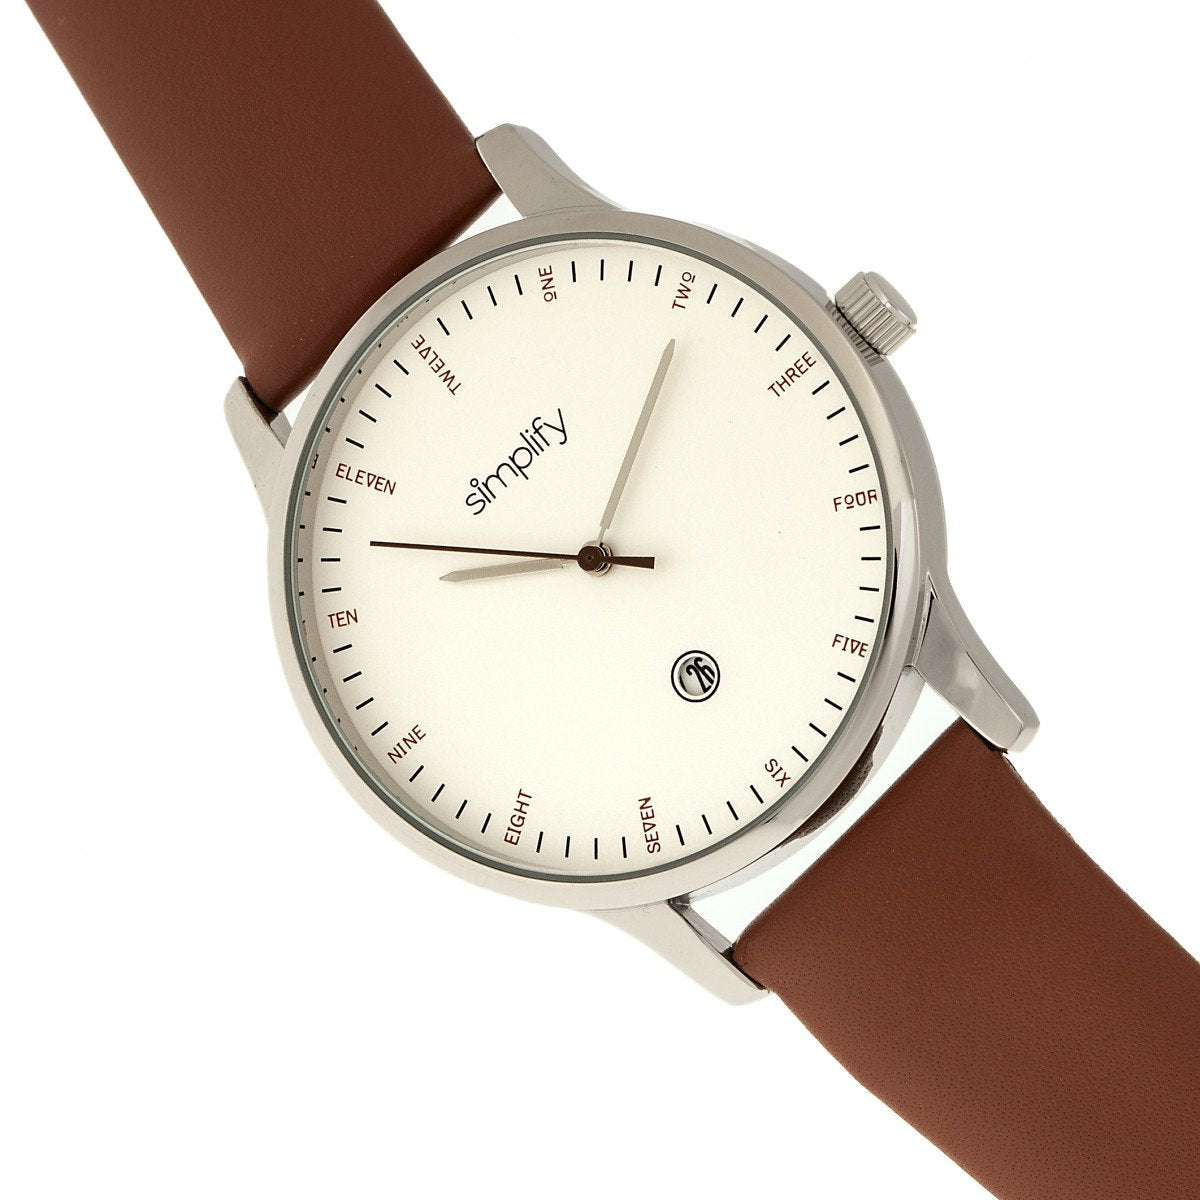 Simplify The 4300 Leather-Band Watch w/Date - Silver/Brown - SIM4302